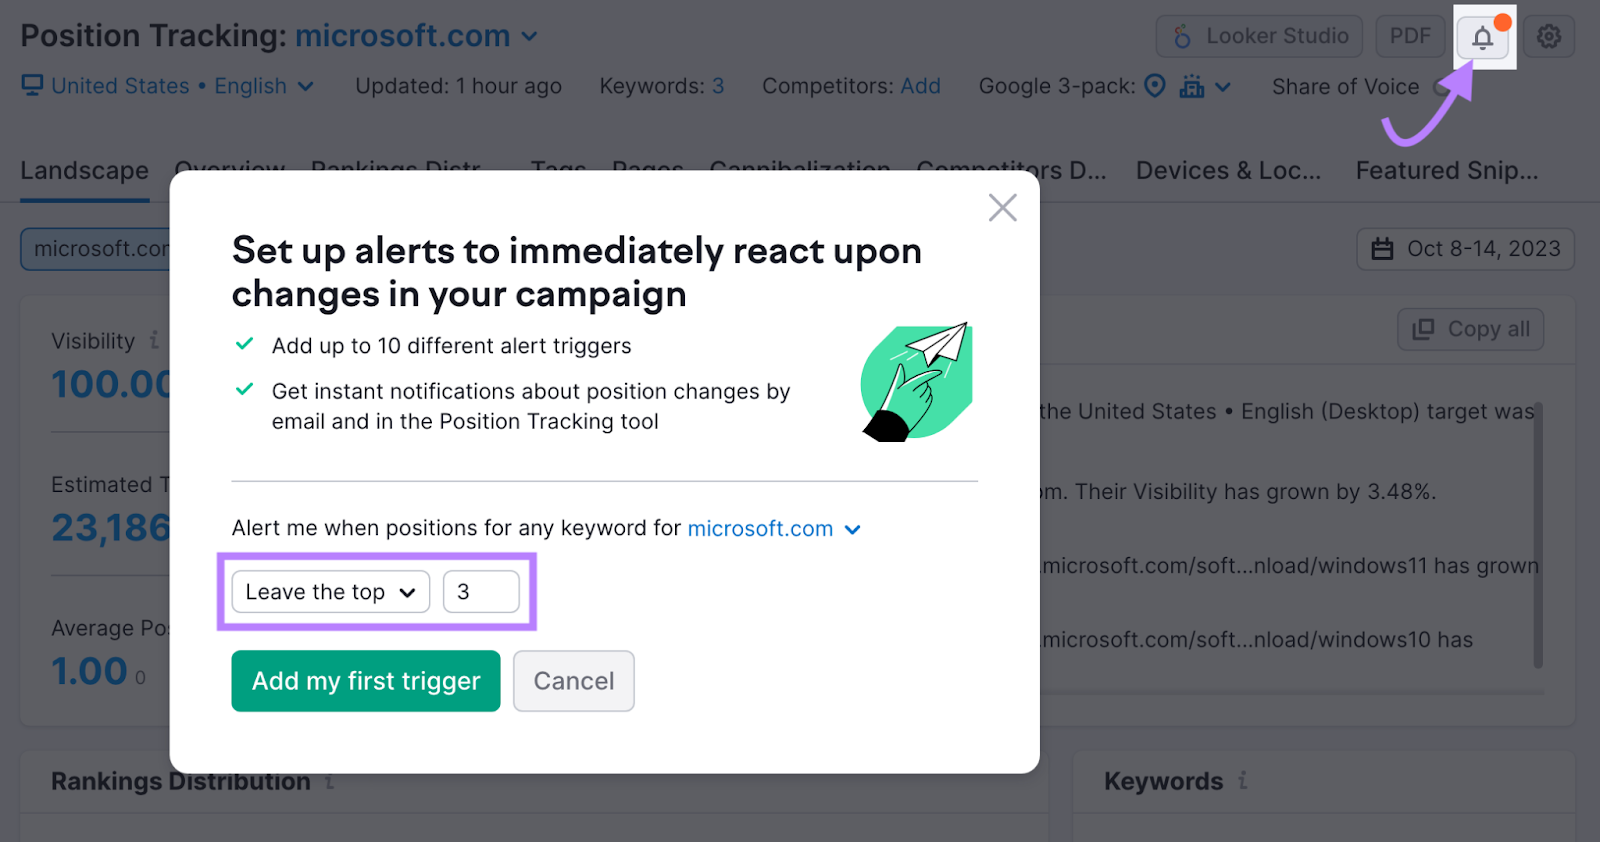 "Set up alerts to immediately react upon changes in your campaign" popup window in Position Tracking